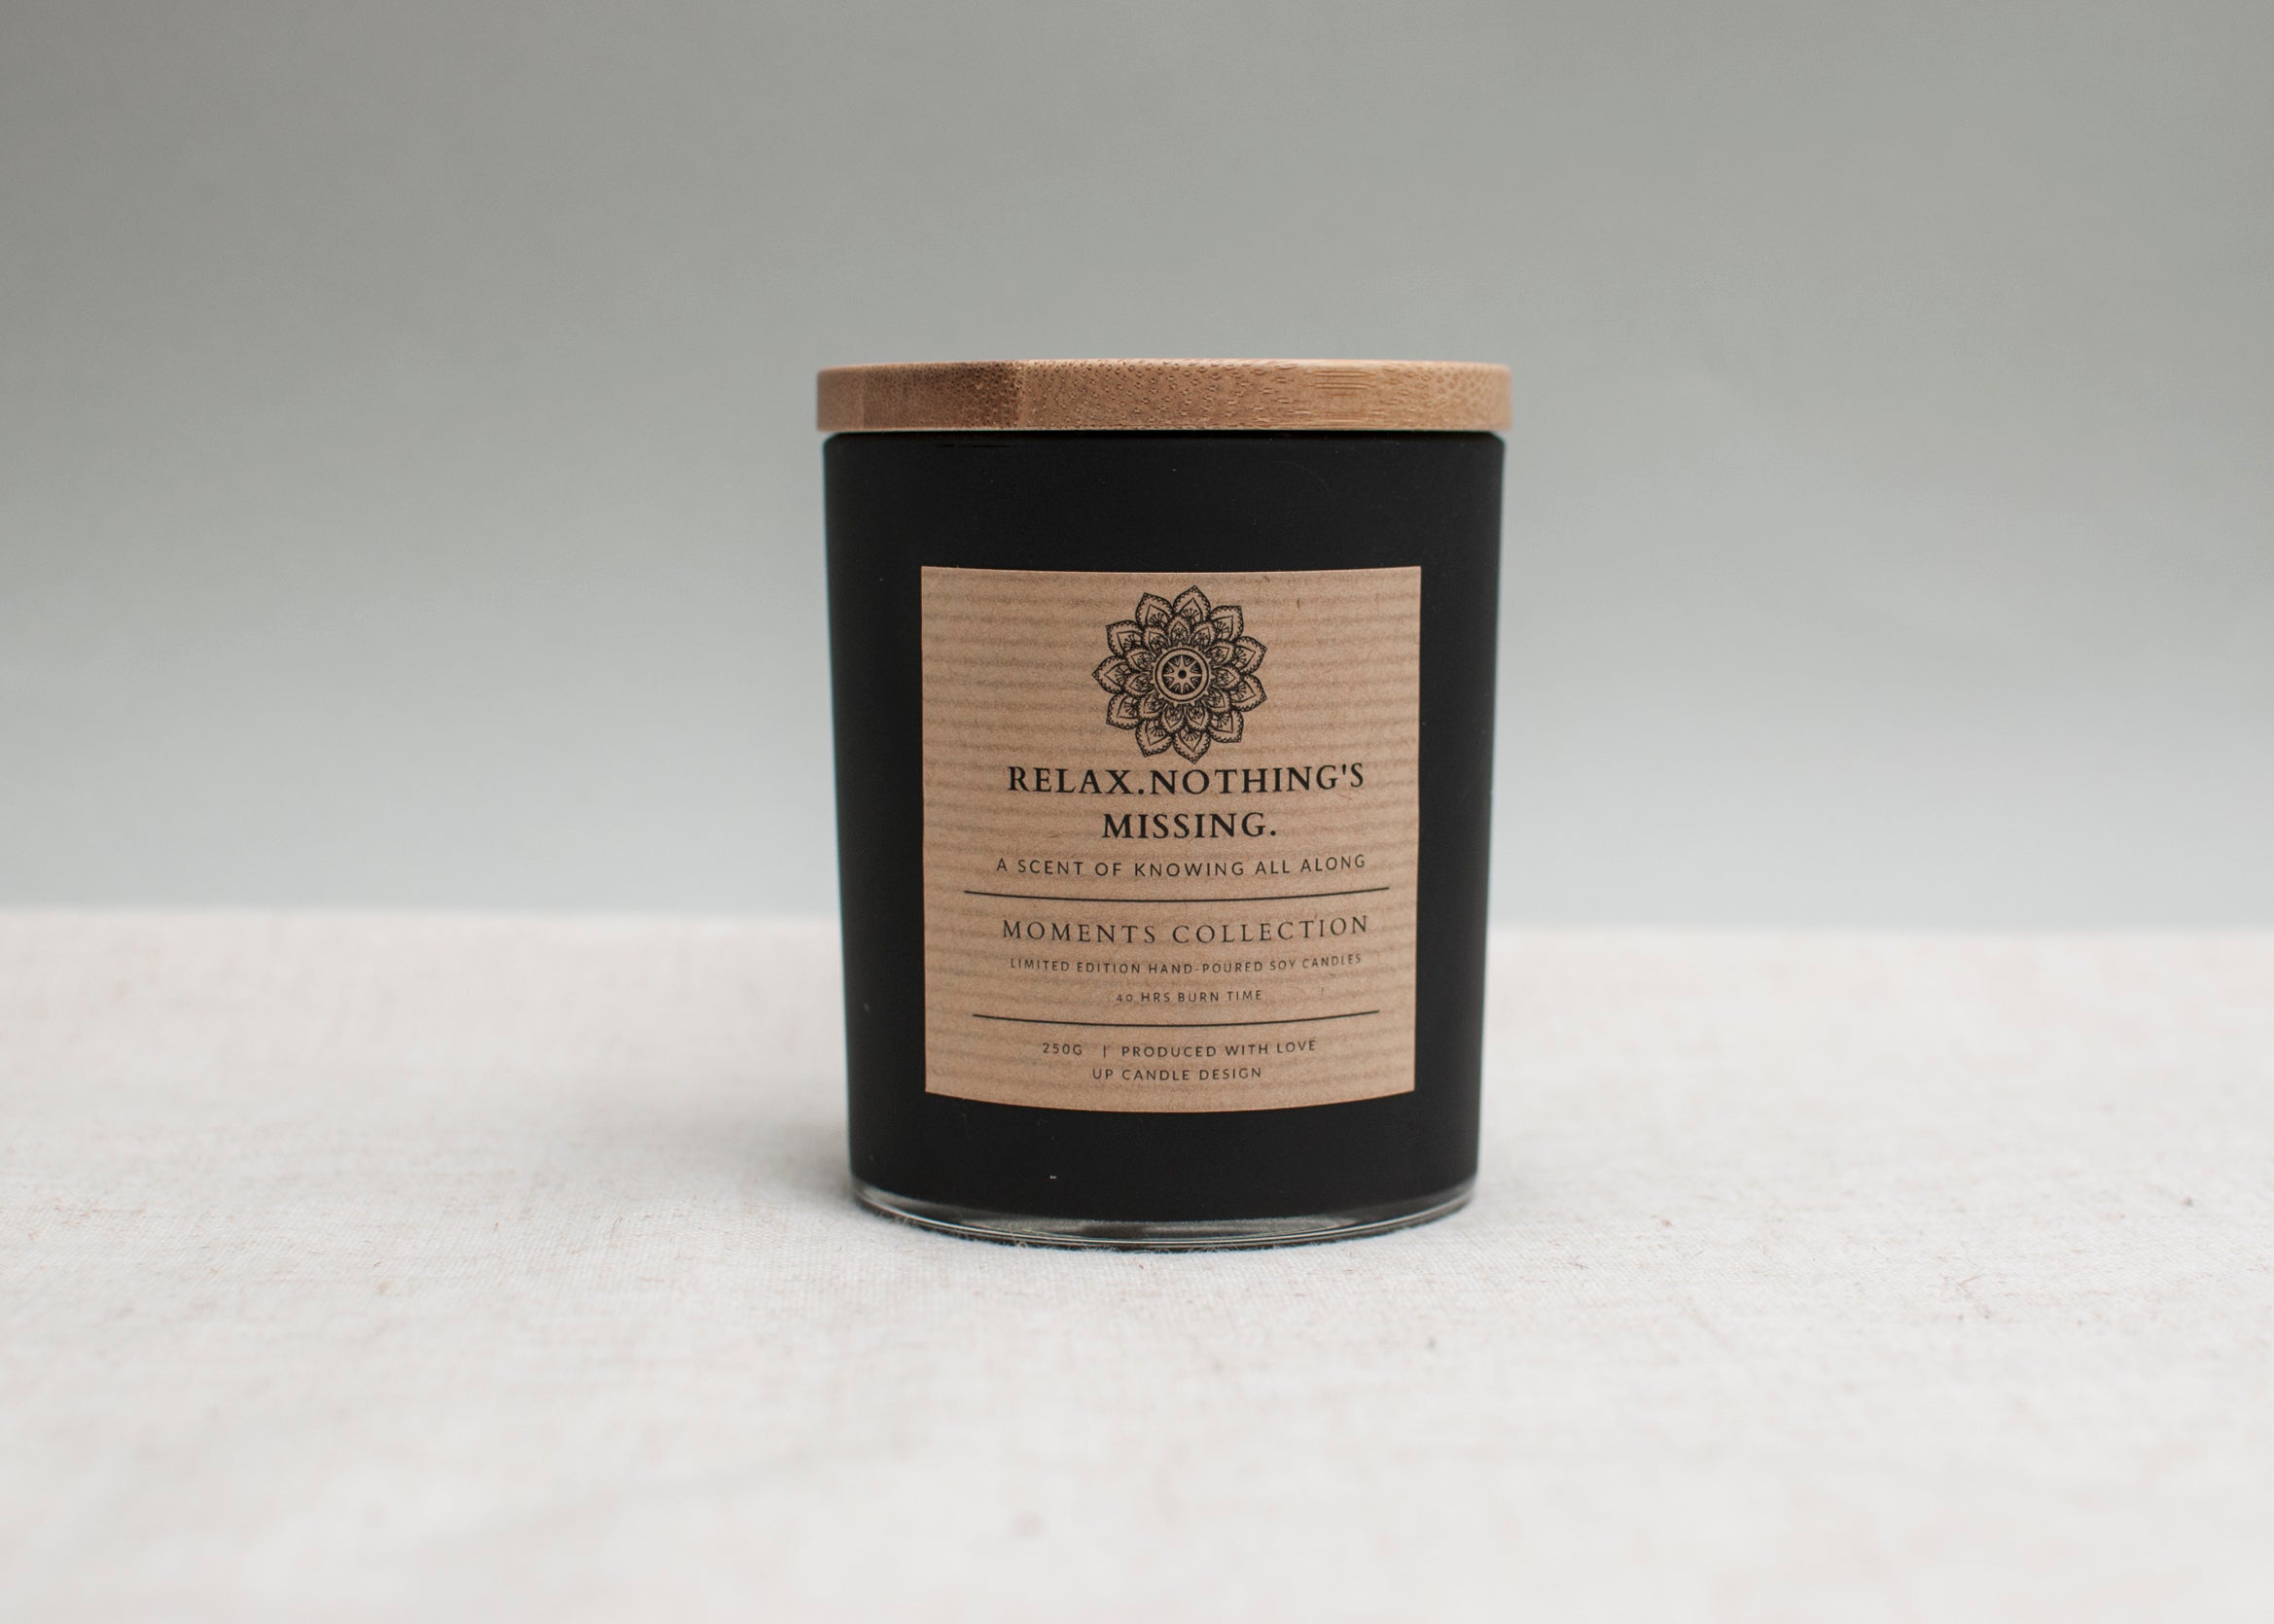 RELAX.NOTHING'S MISSING - Scented Candle